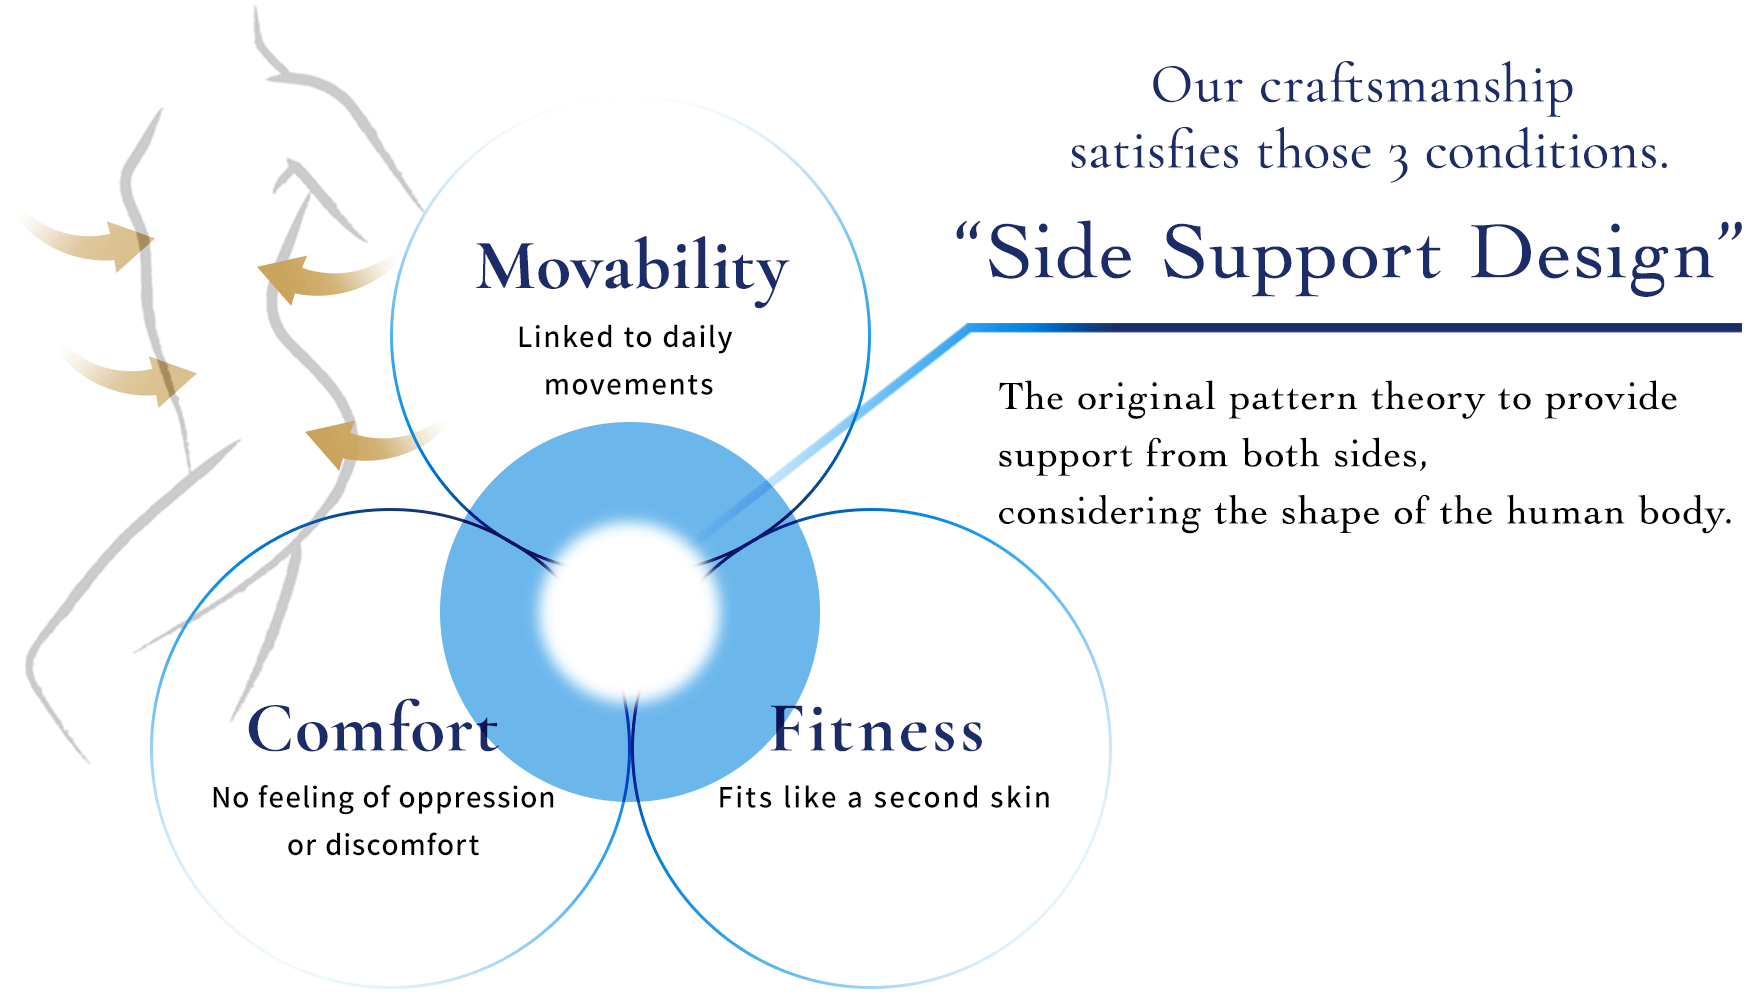 Our craftsmanship satisfies those 3 conditions.[Movability]Linked to daily 
movements [Comfort]No feeling of oppression or discomfort [Fitness]Fits like a second skin